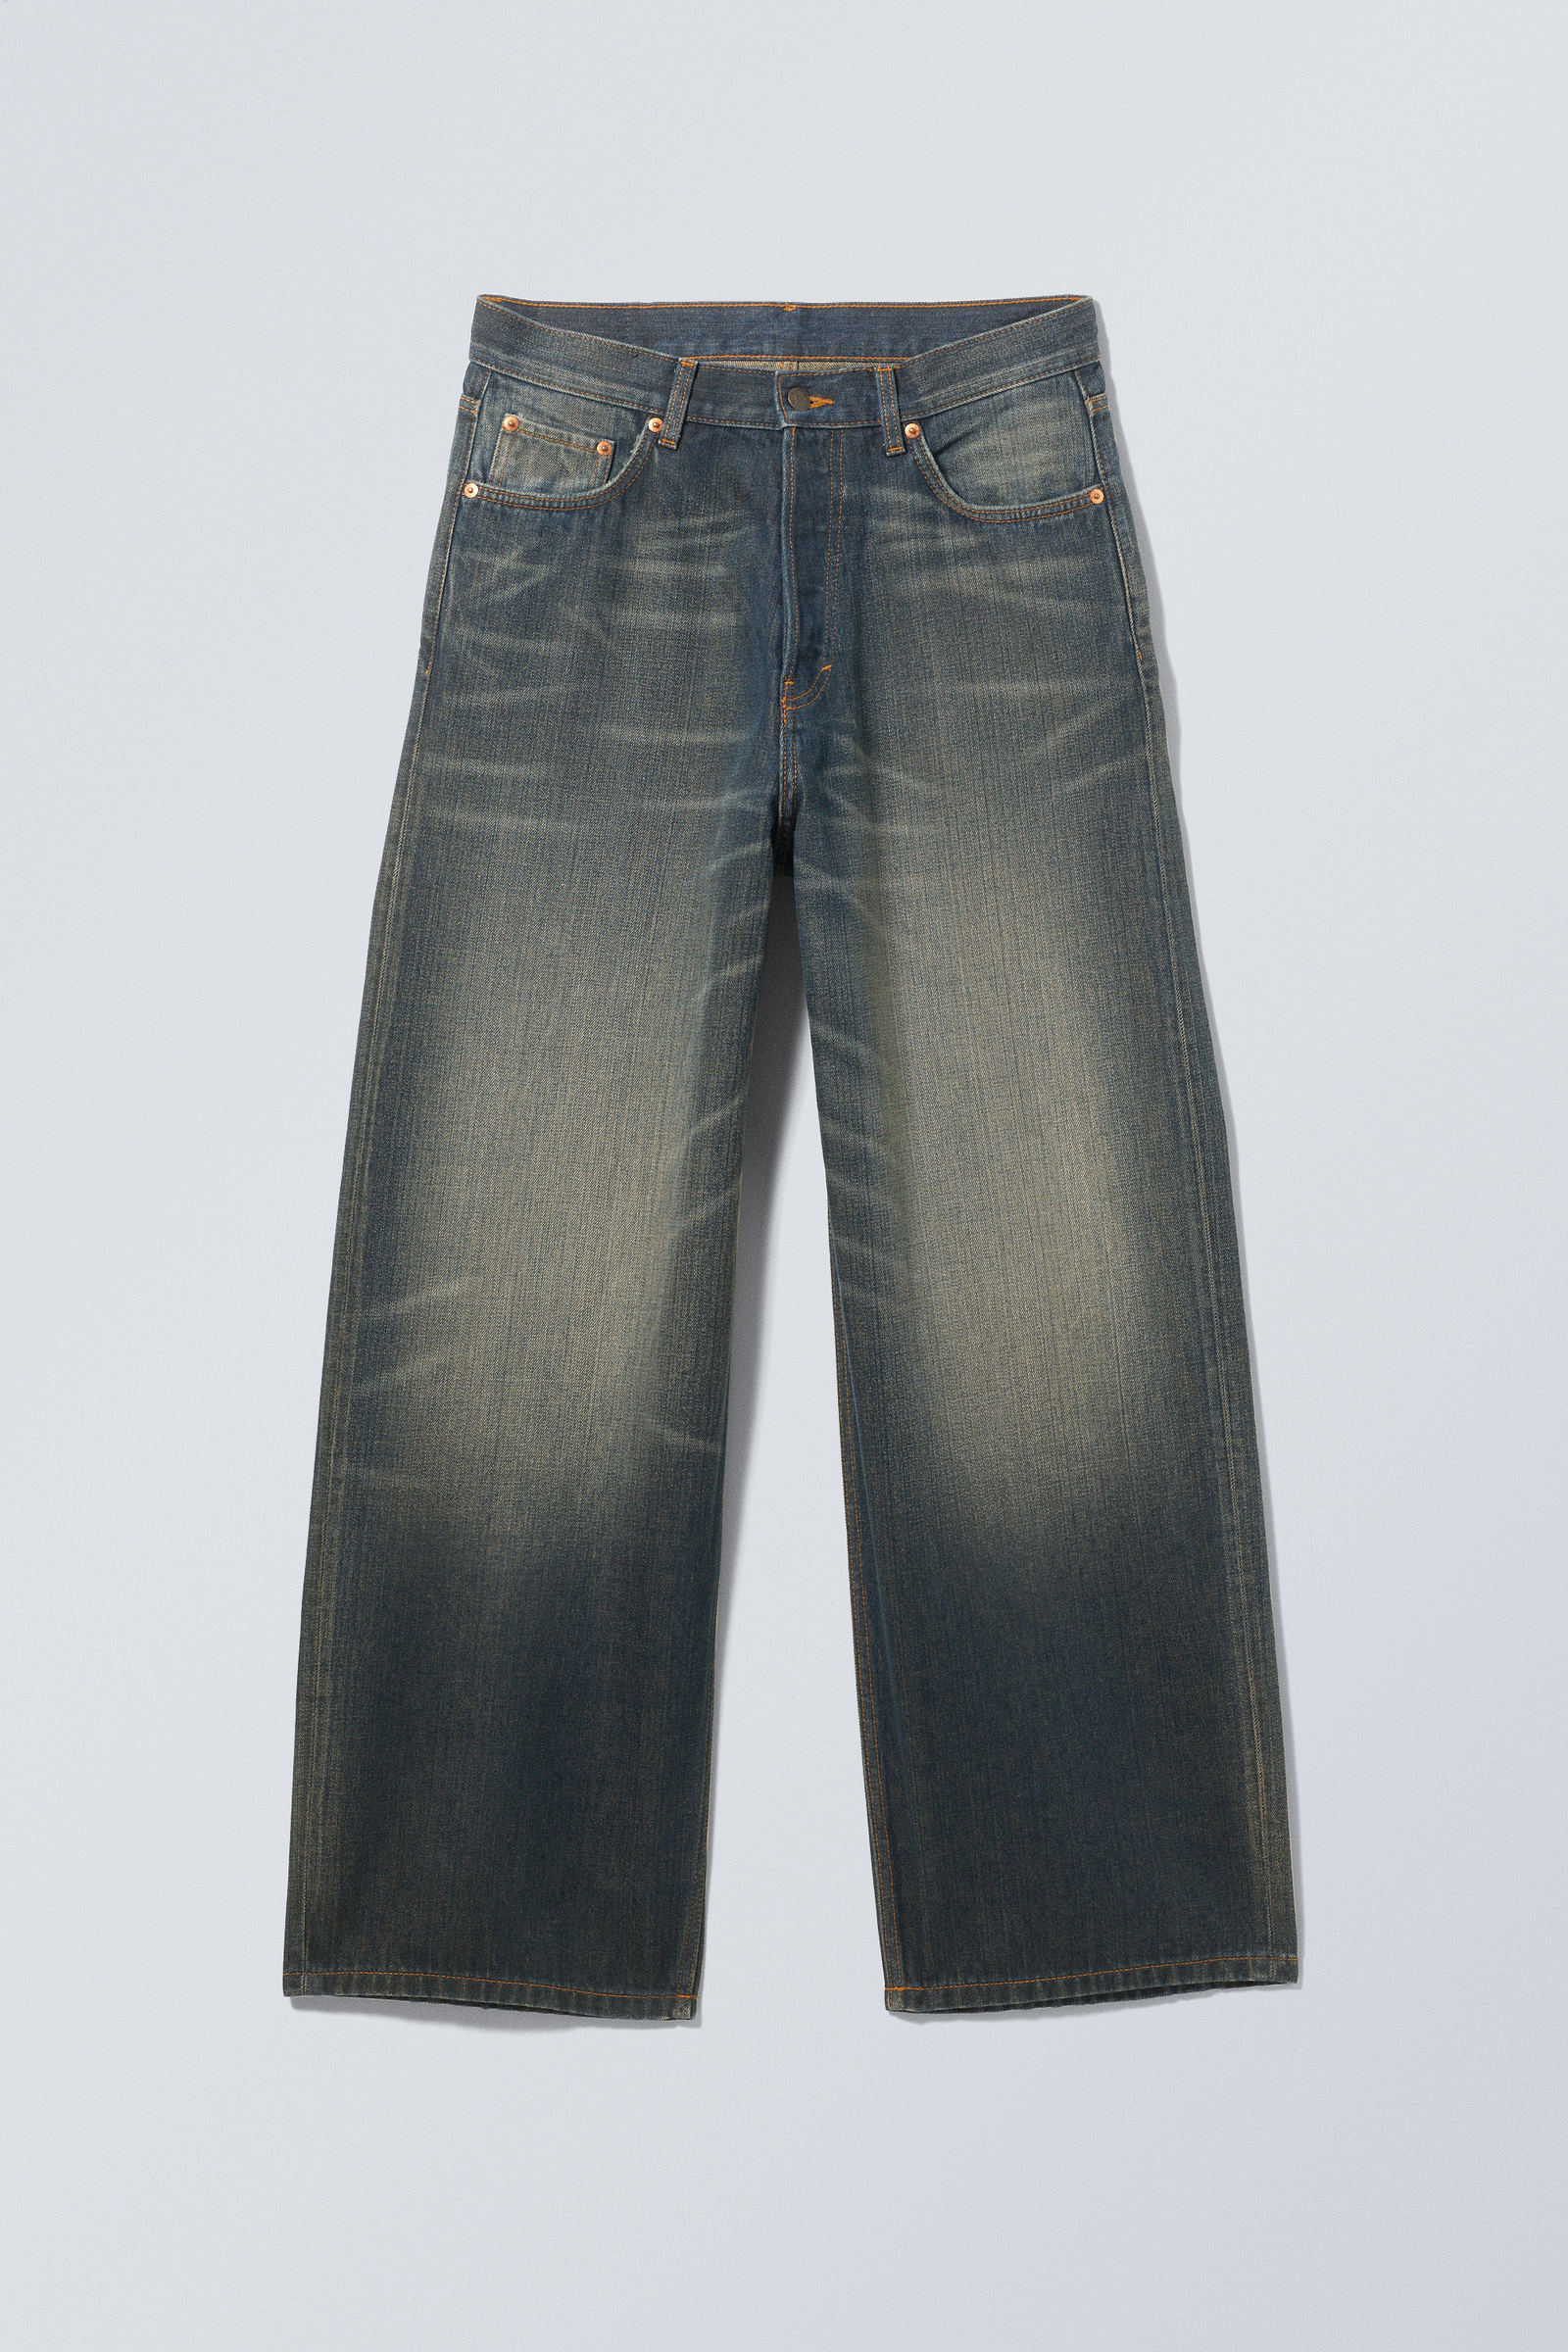 Marsh Blue - Astro Loose Baggy Jeans - 10